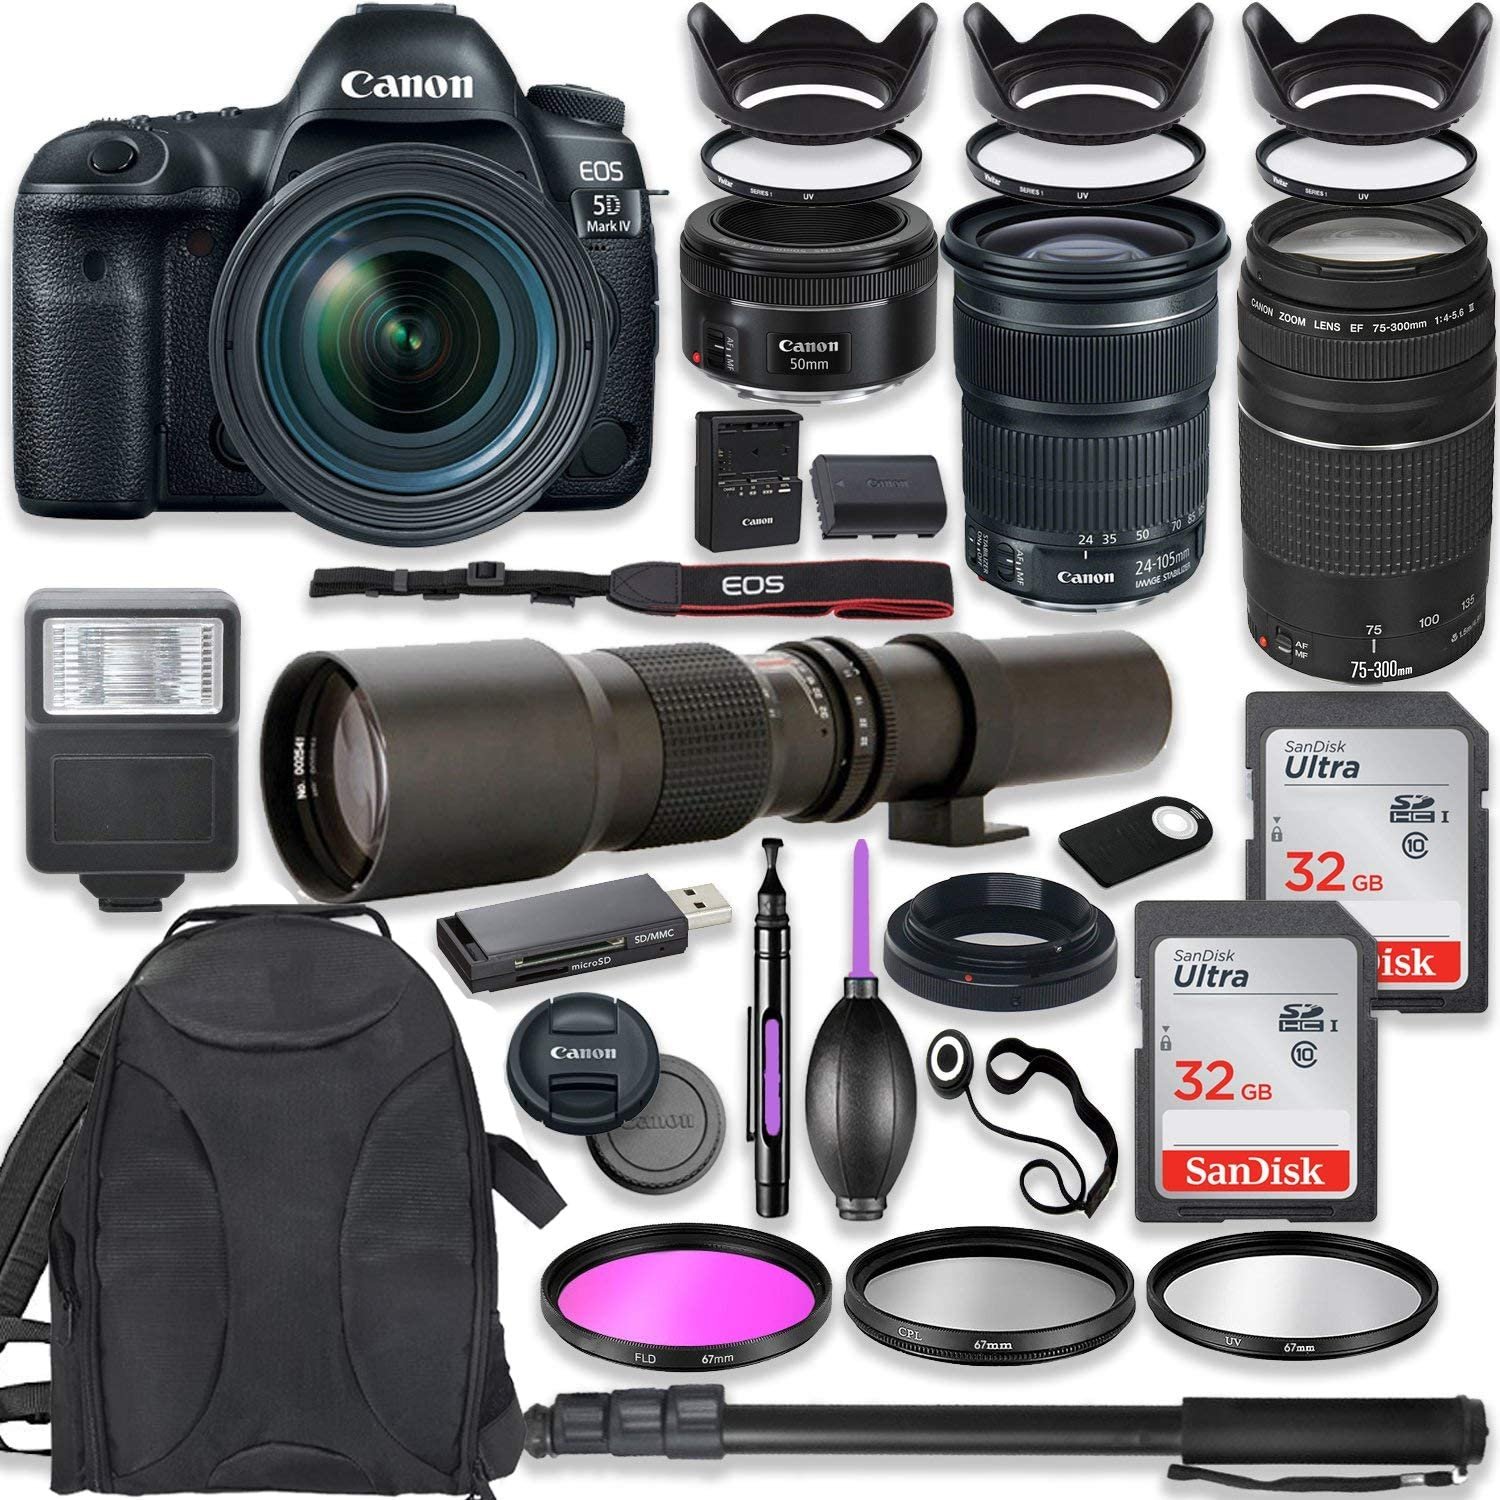 Canon EOS 5D Mark IV DSLR Camera w/ 24-105mm STM Lens Bundle + Canon EF 75-300mm III Lens, Canon 50mm f/1.8 and 500mm Preset Lens + Deluxe Backpack + 64GB Memory + Monopod + Professional Bundle - image 1 of 7